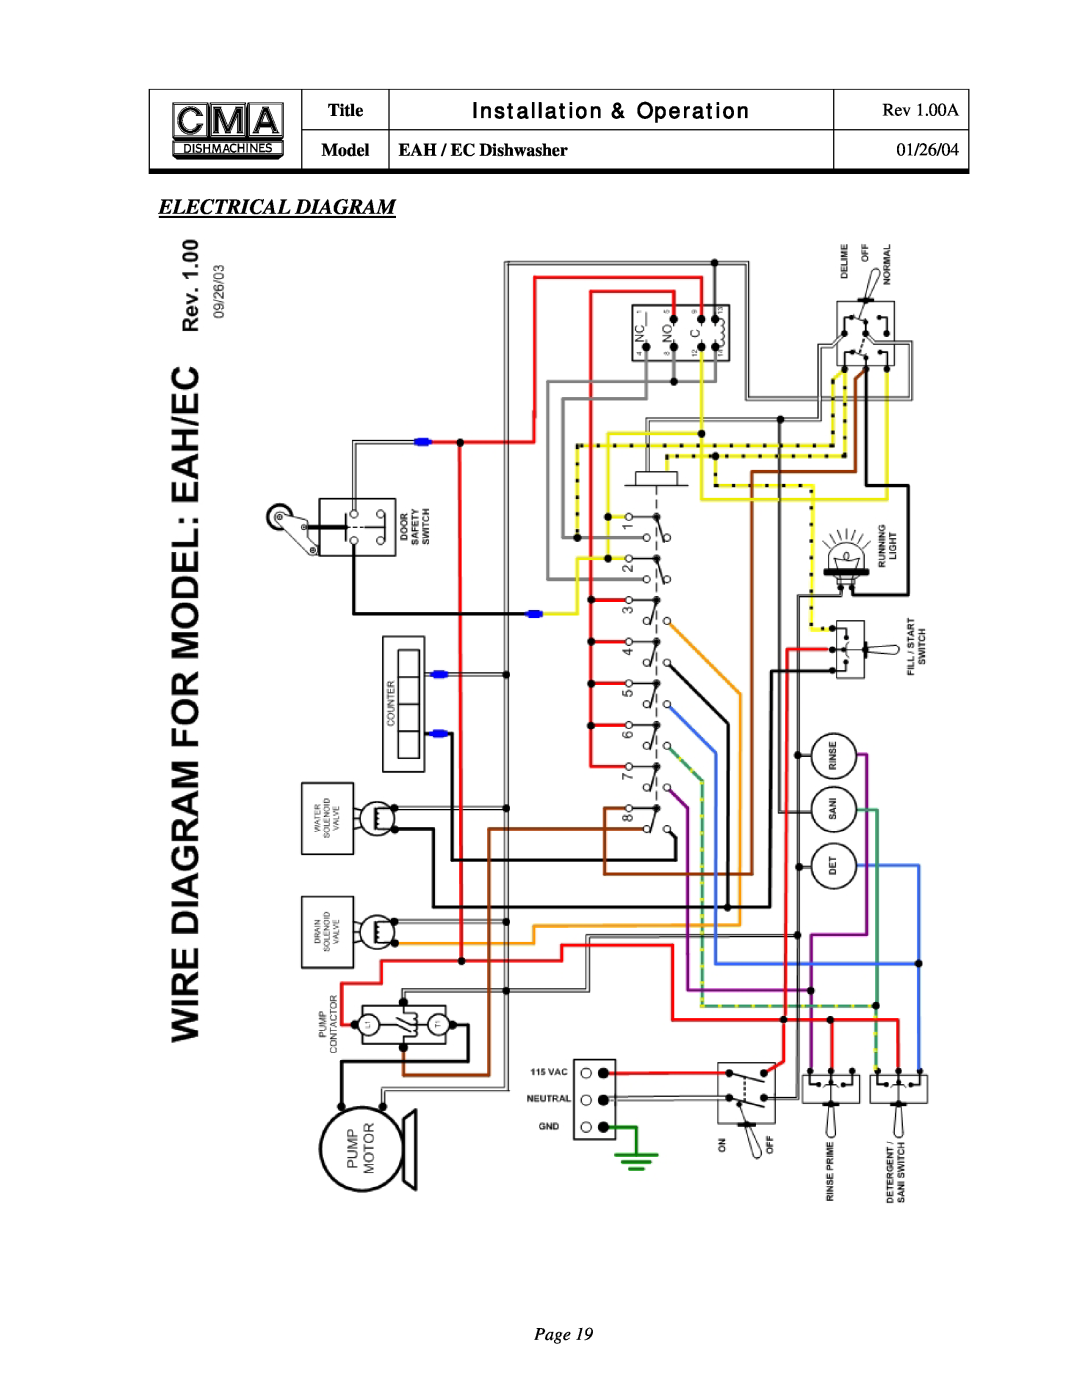 CMA Dishmachines EAH/EC owner manual Electrical Diagram, Installation & Operation 